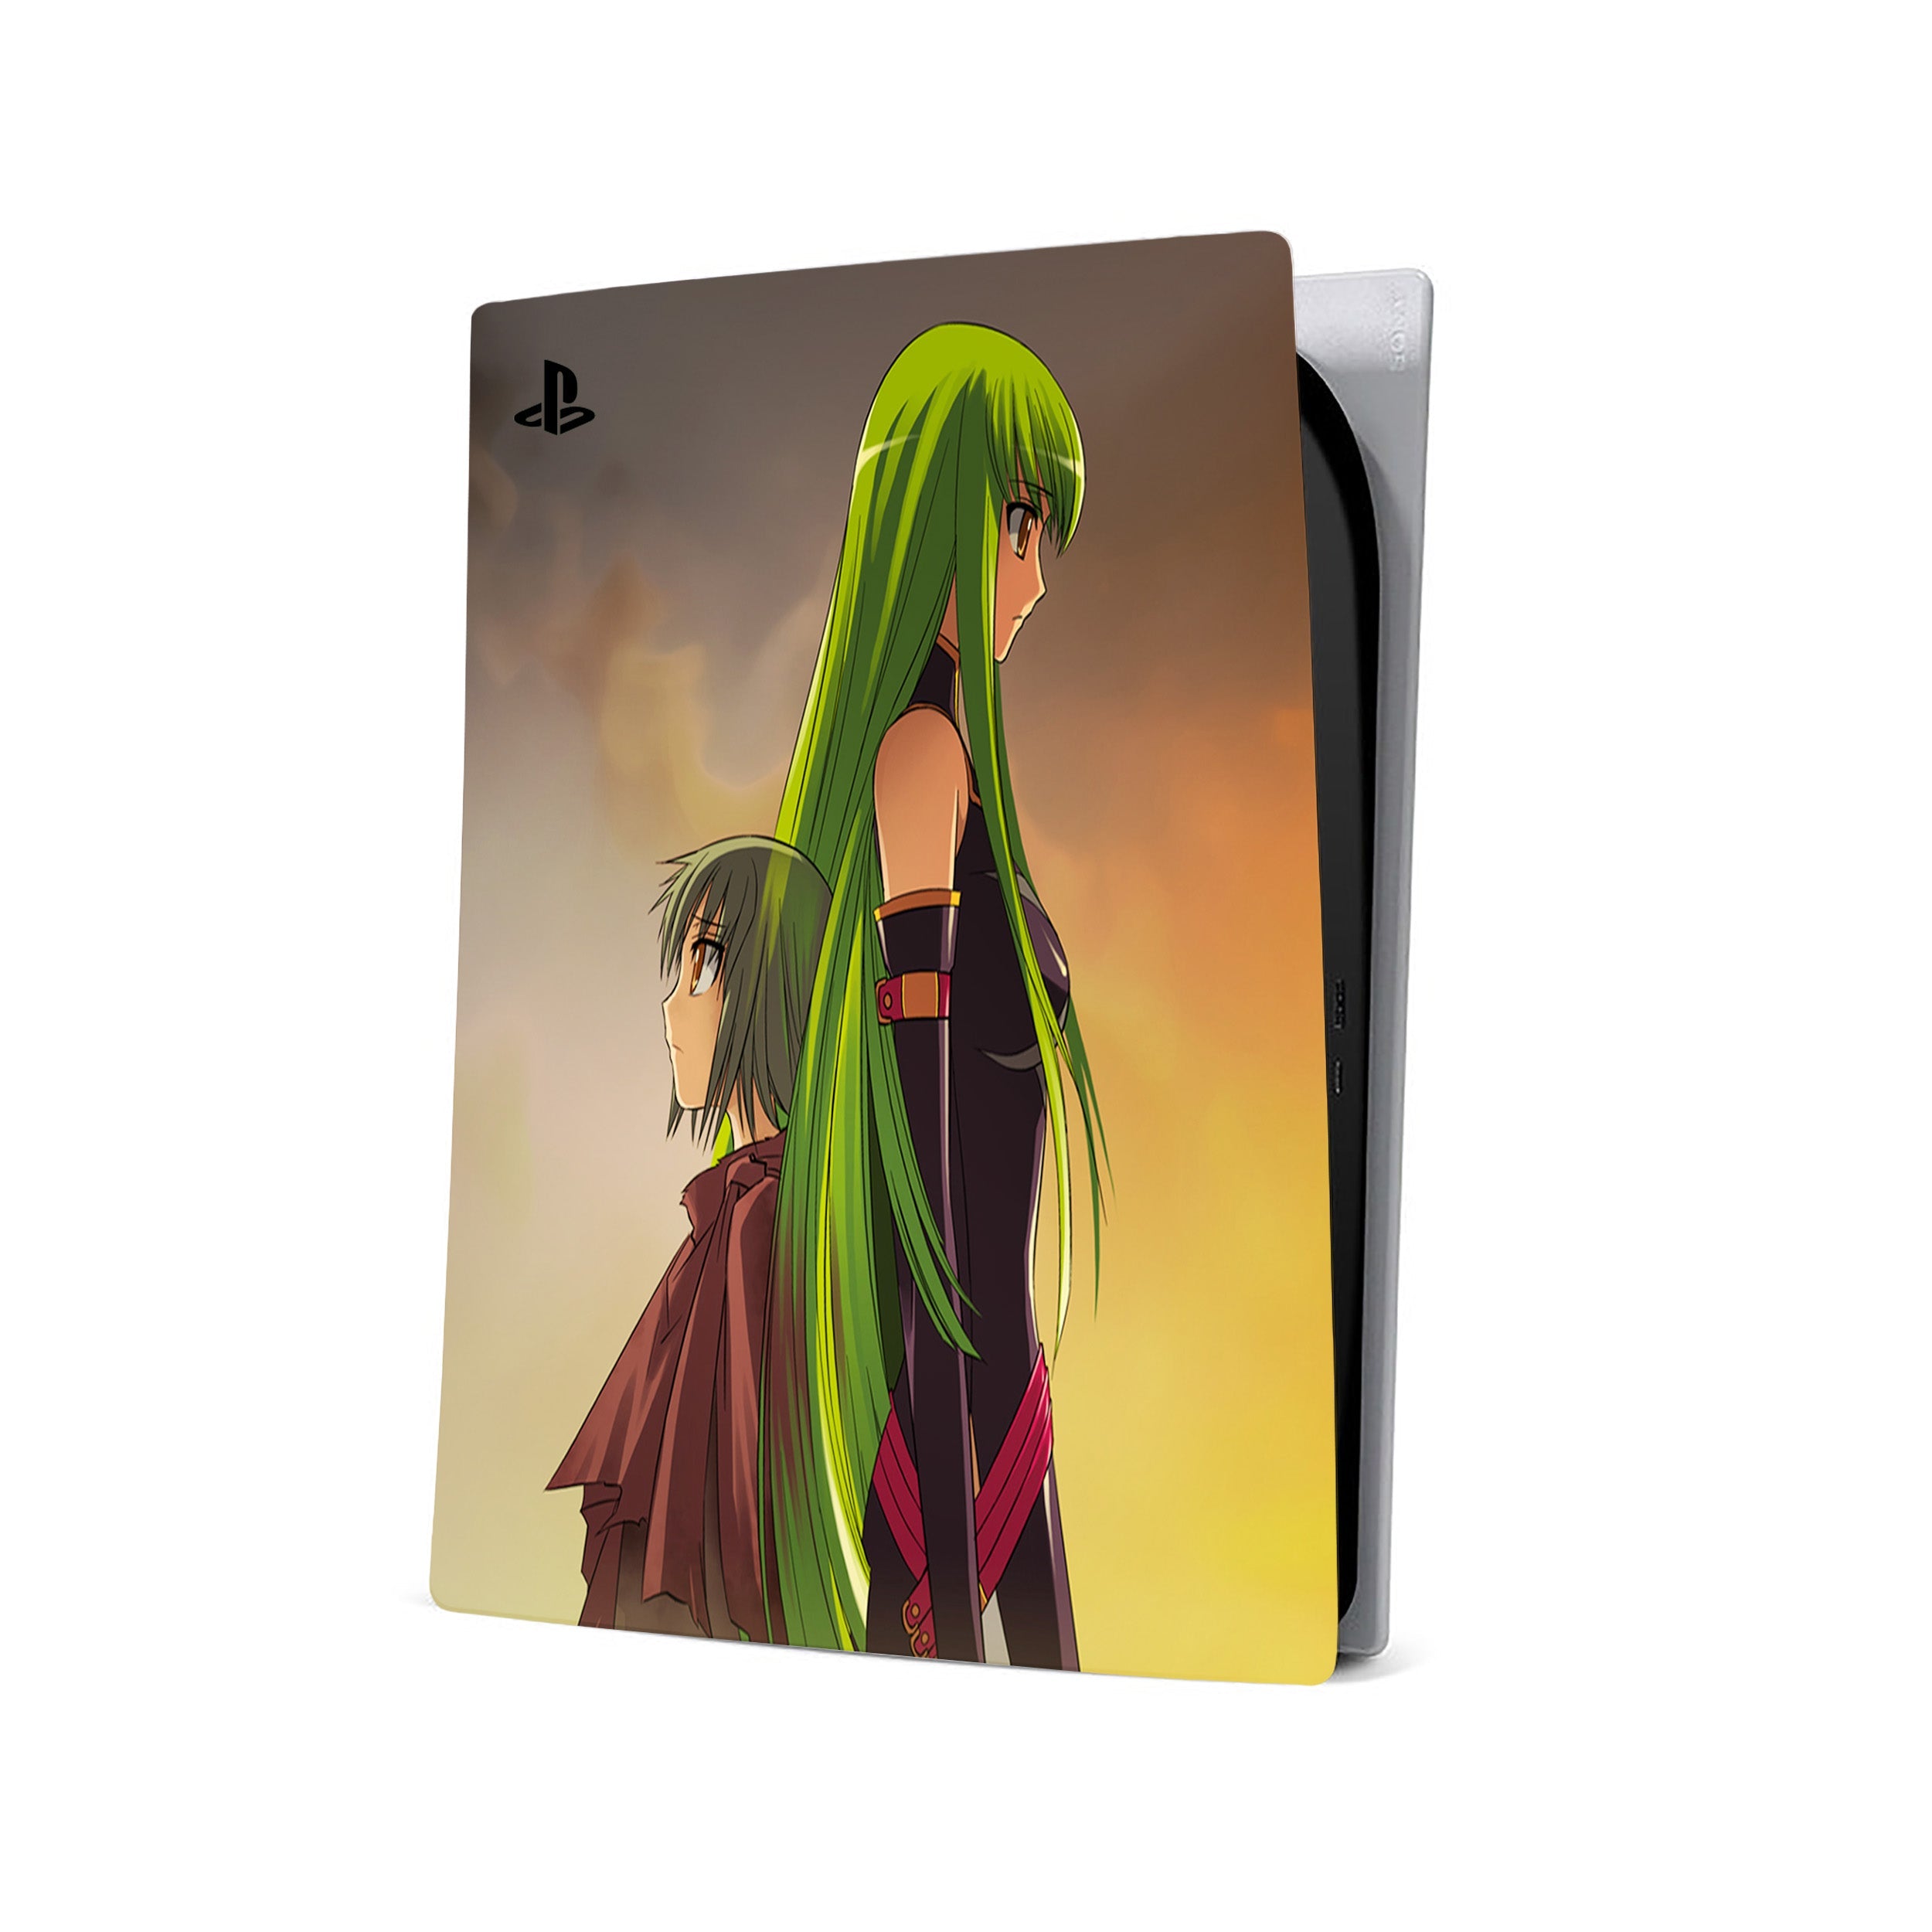 A video game skin featuring a Code Geass CC design for the PS5.